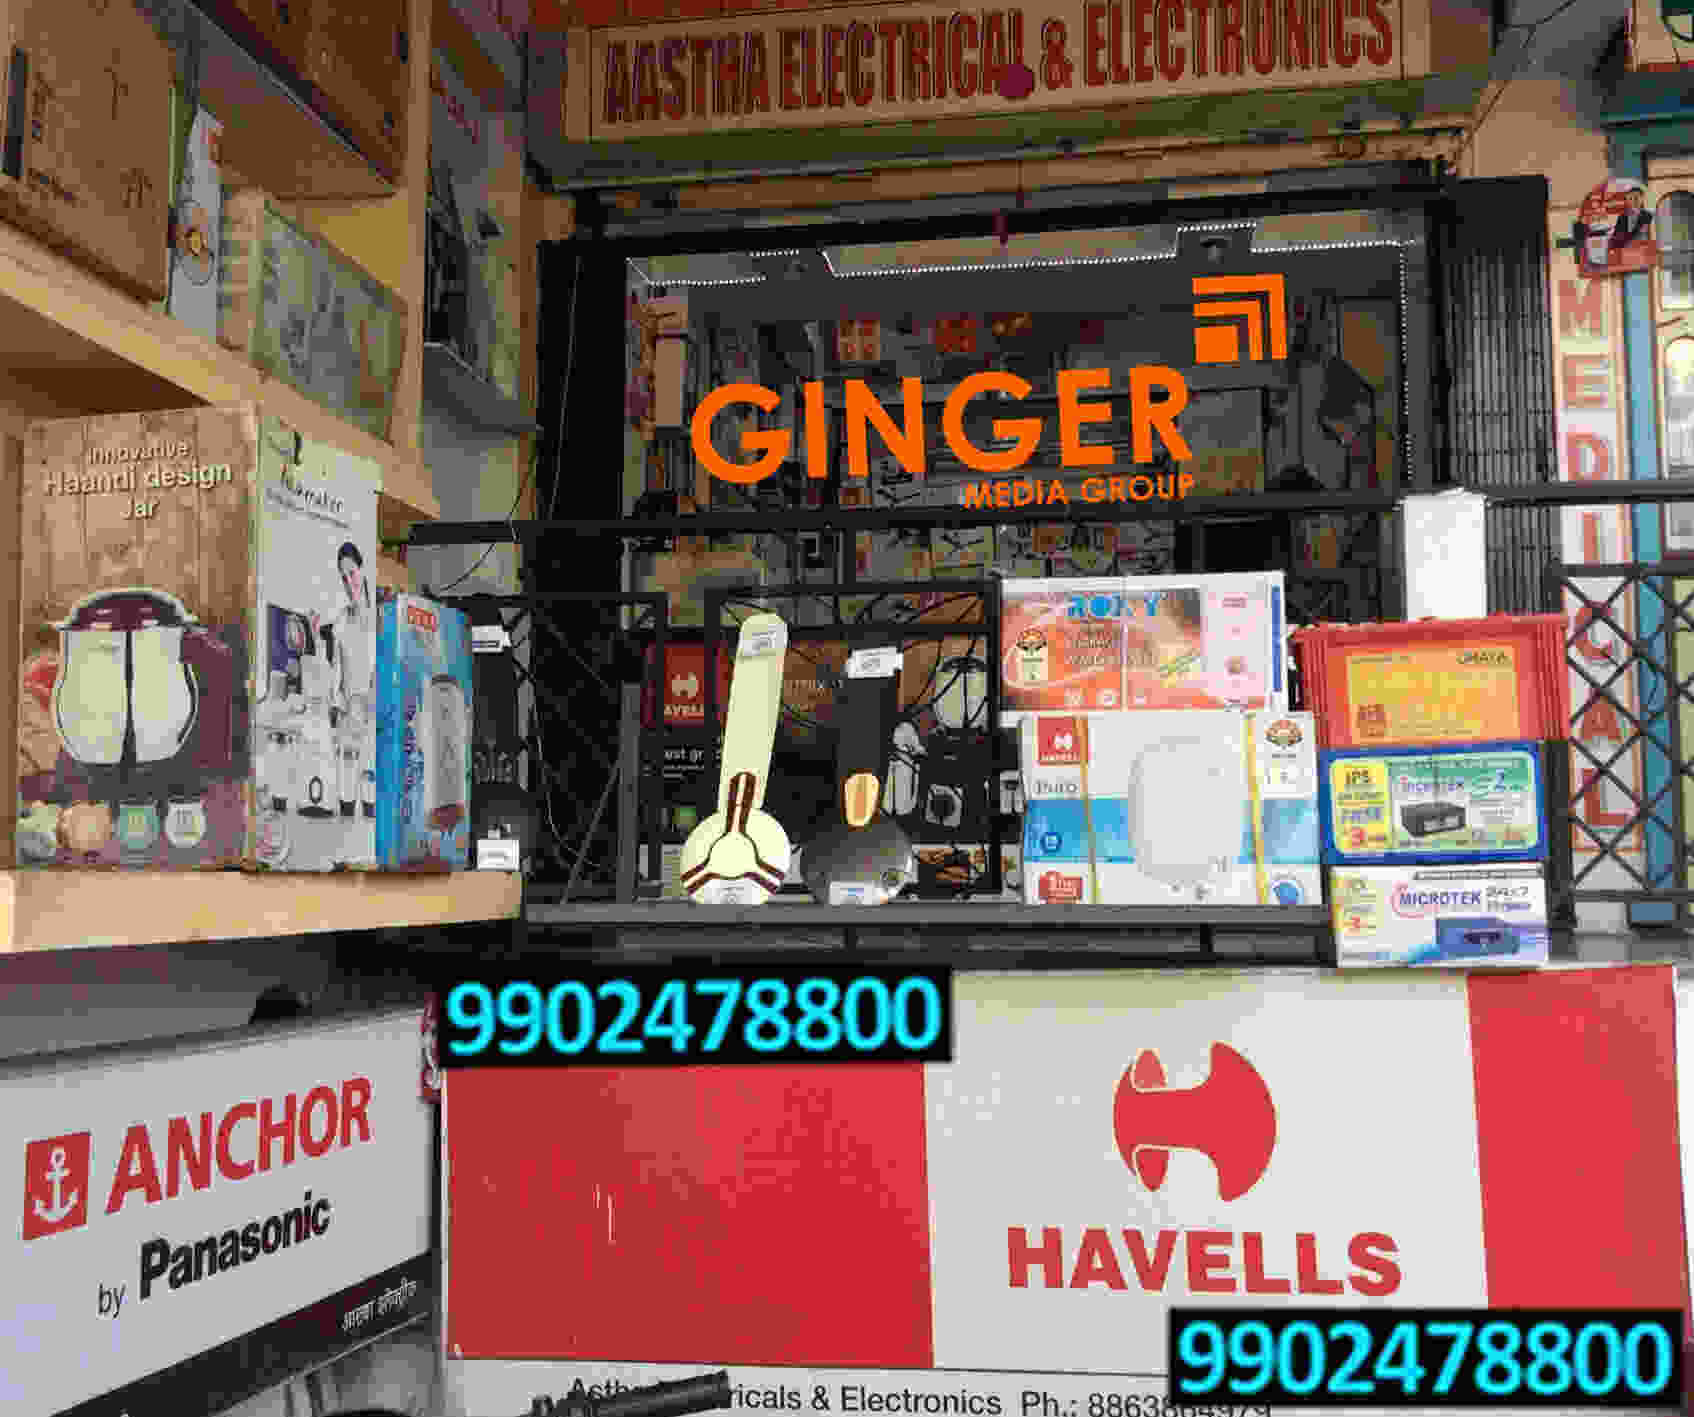 Retail Branding in India for Panasonic and Havells Brand